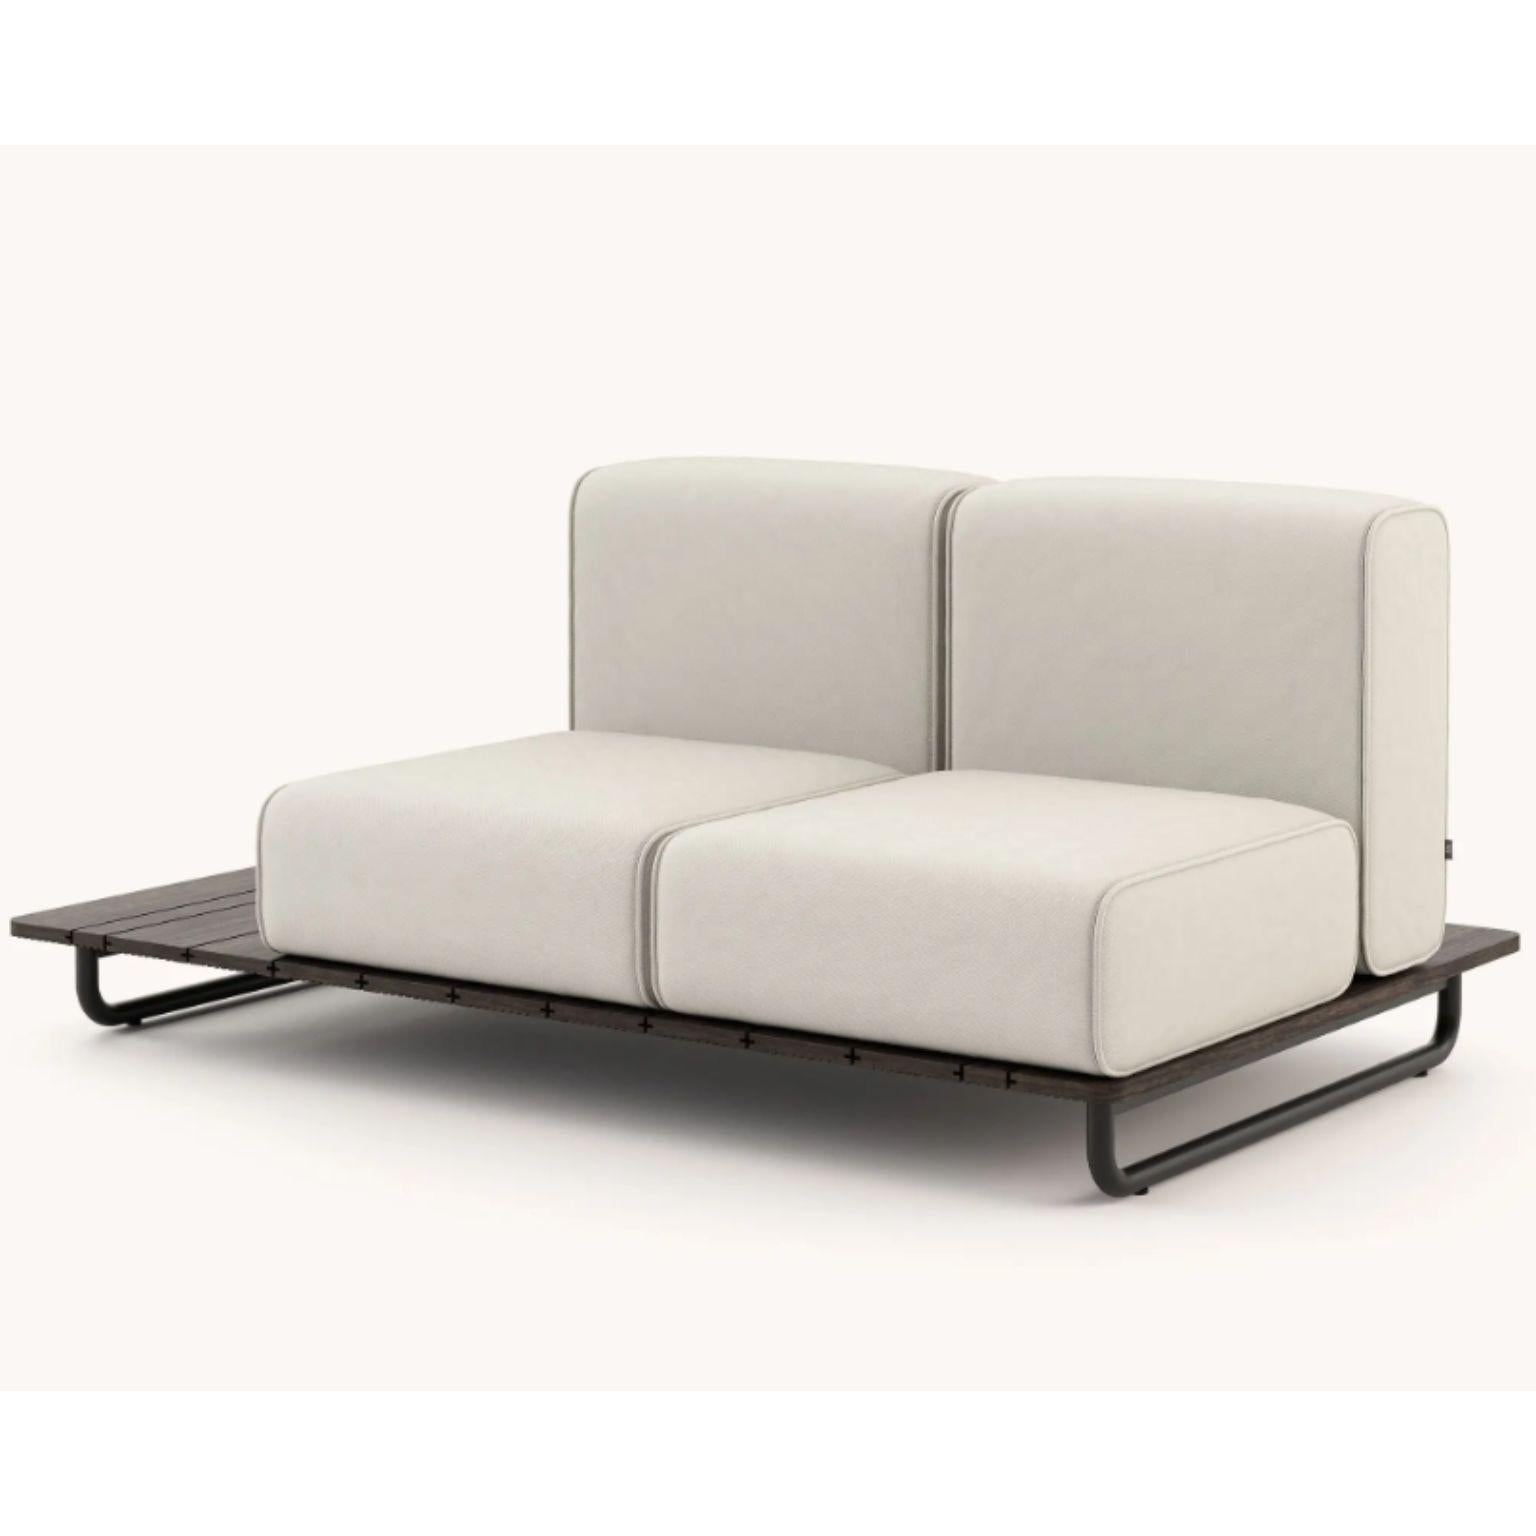 Copacabana sofa without Armrest by Domkapa
Materials: black texturized steel, bamboo wood, fabric (Rhine Ice).
Dimensions: W 165 x D 105 x H 75 cm.
Also available in different materials. 

Copacabana Sofa with or without armrest is an exclusive